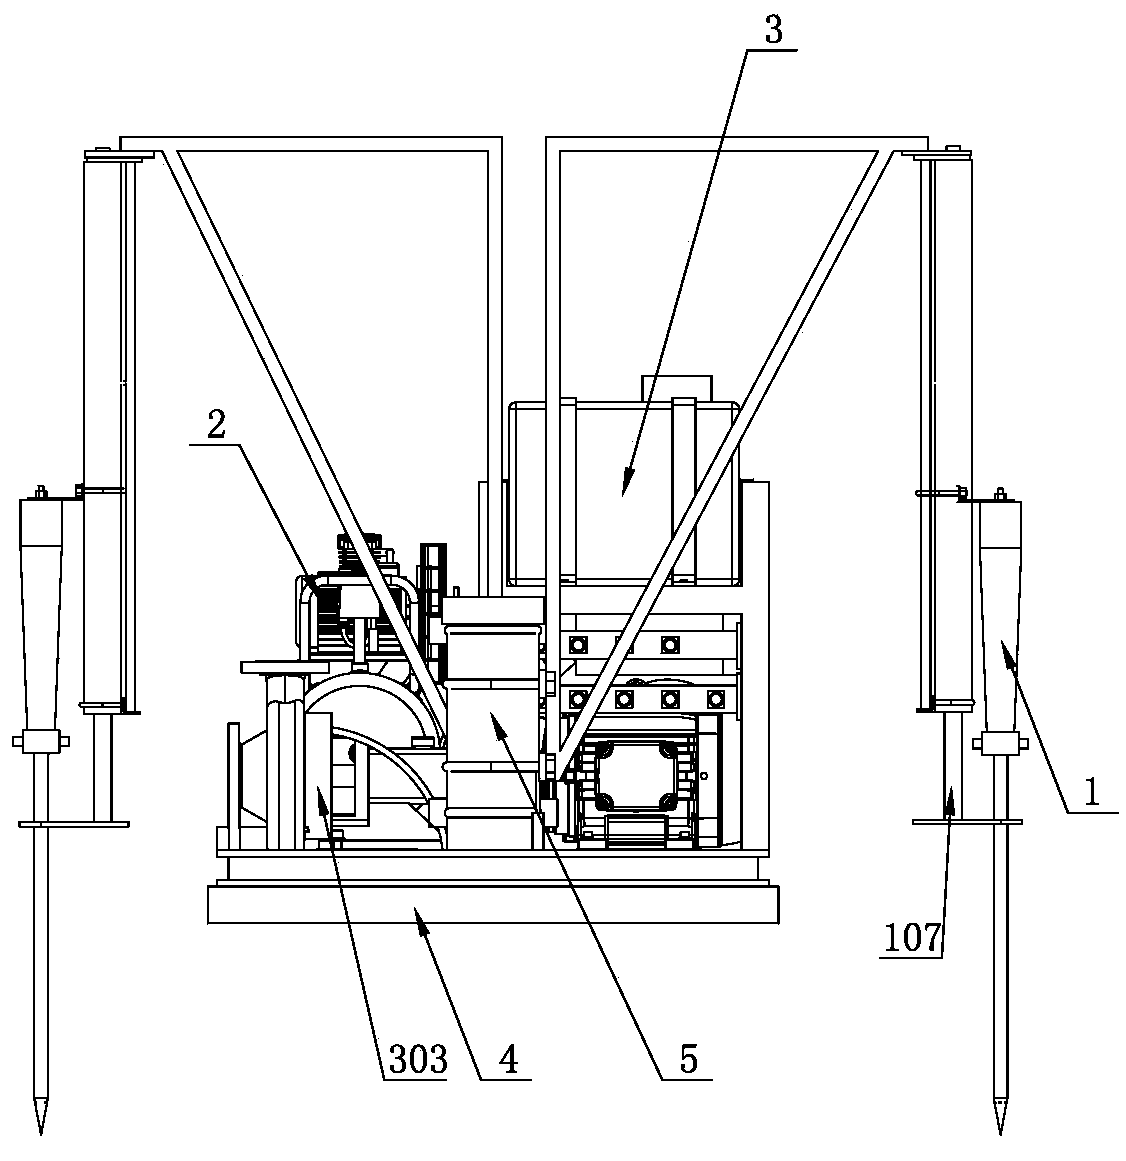 A pneumatic soil loosening and fertilizing device and method